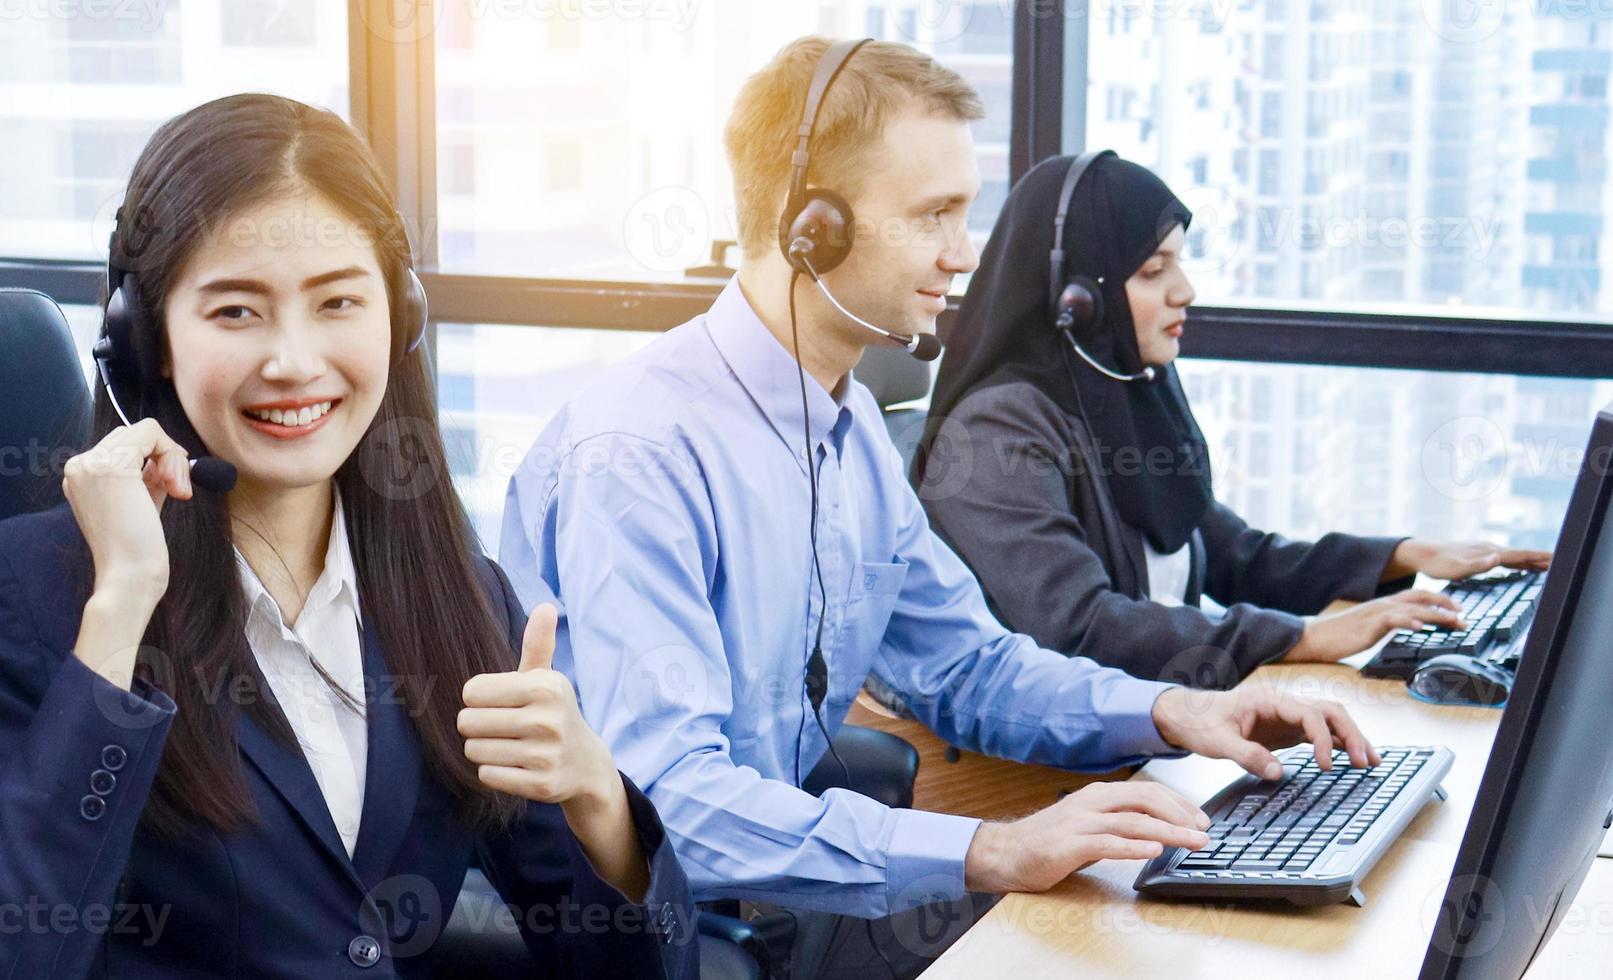 Group call center workers in a modern office photo